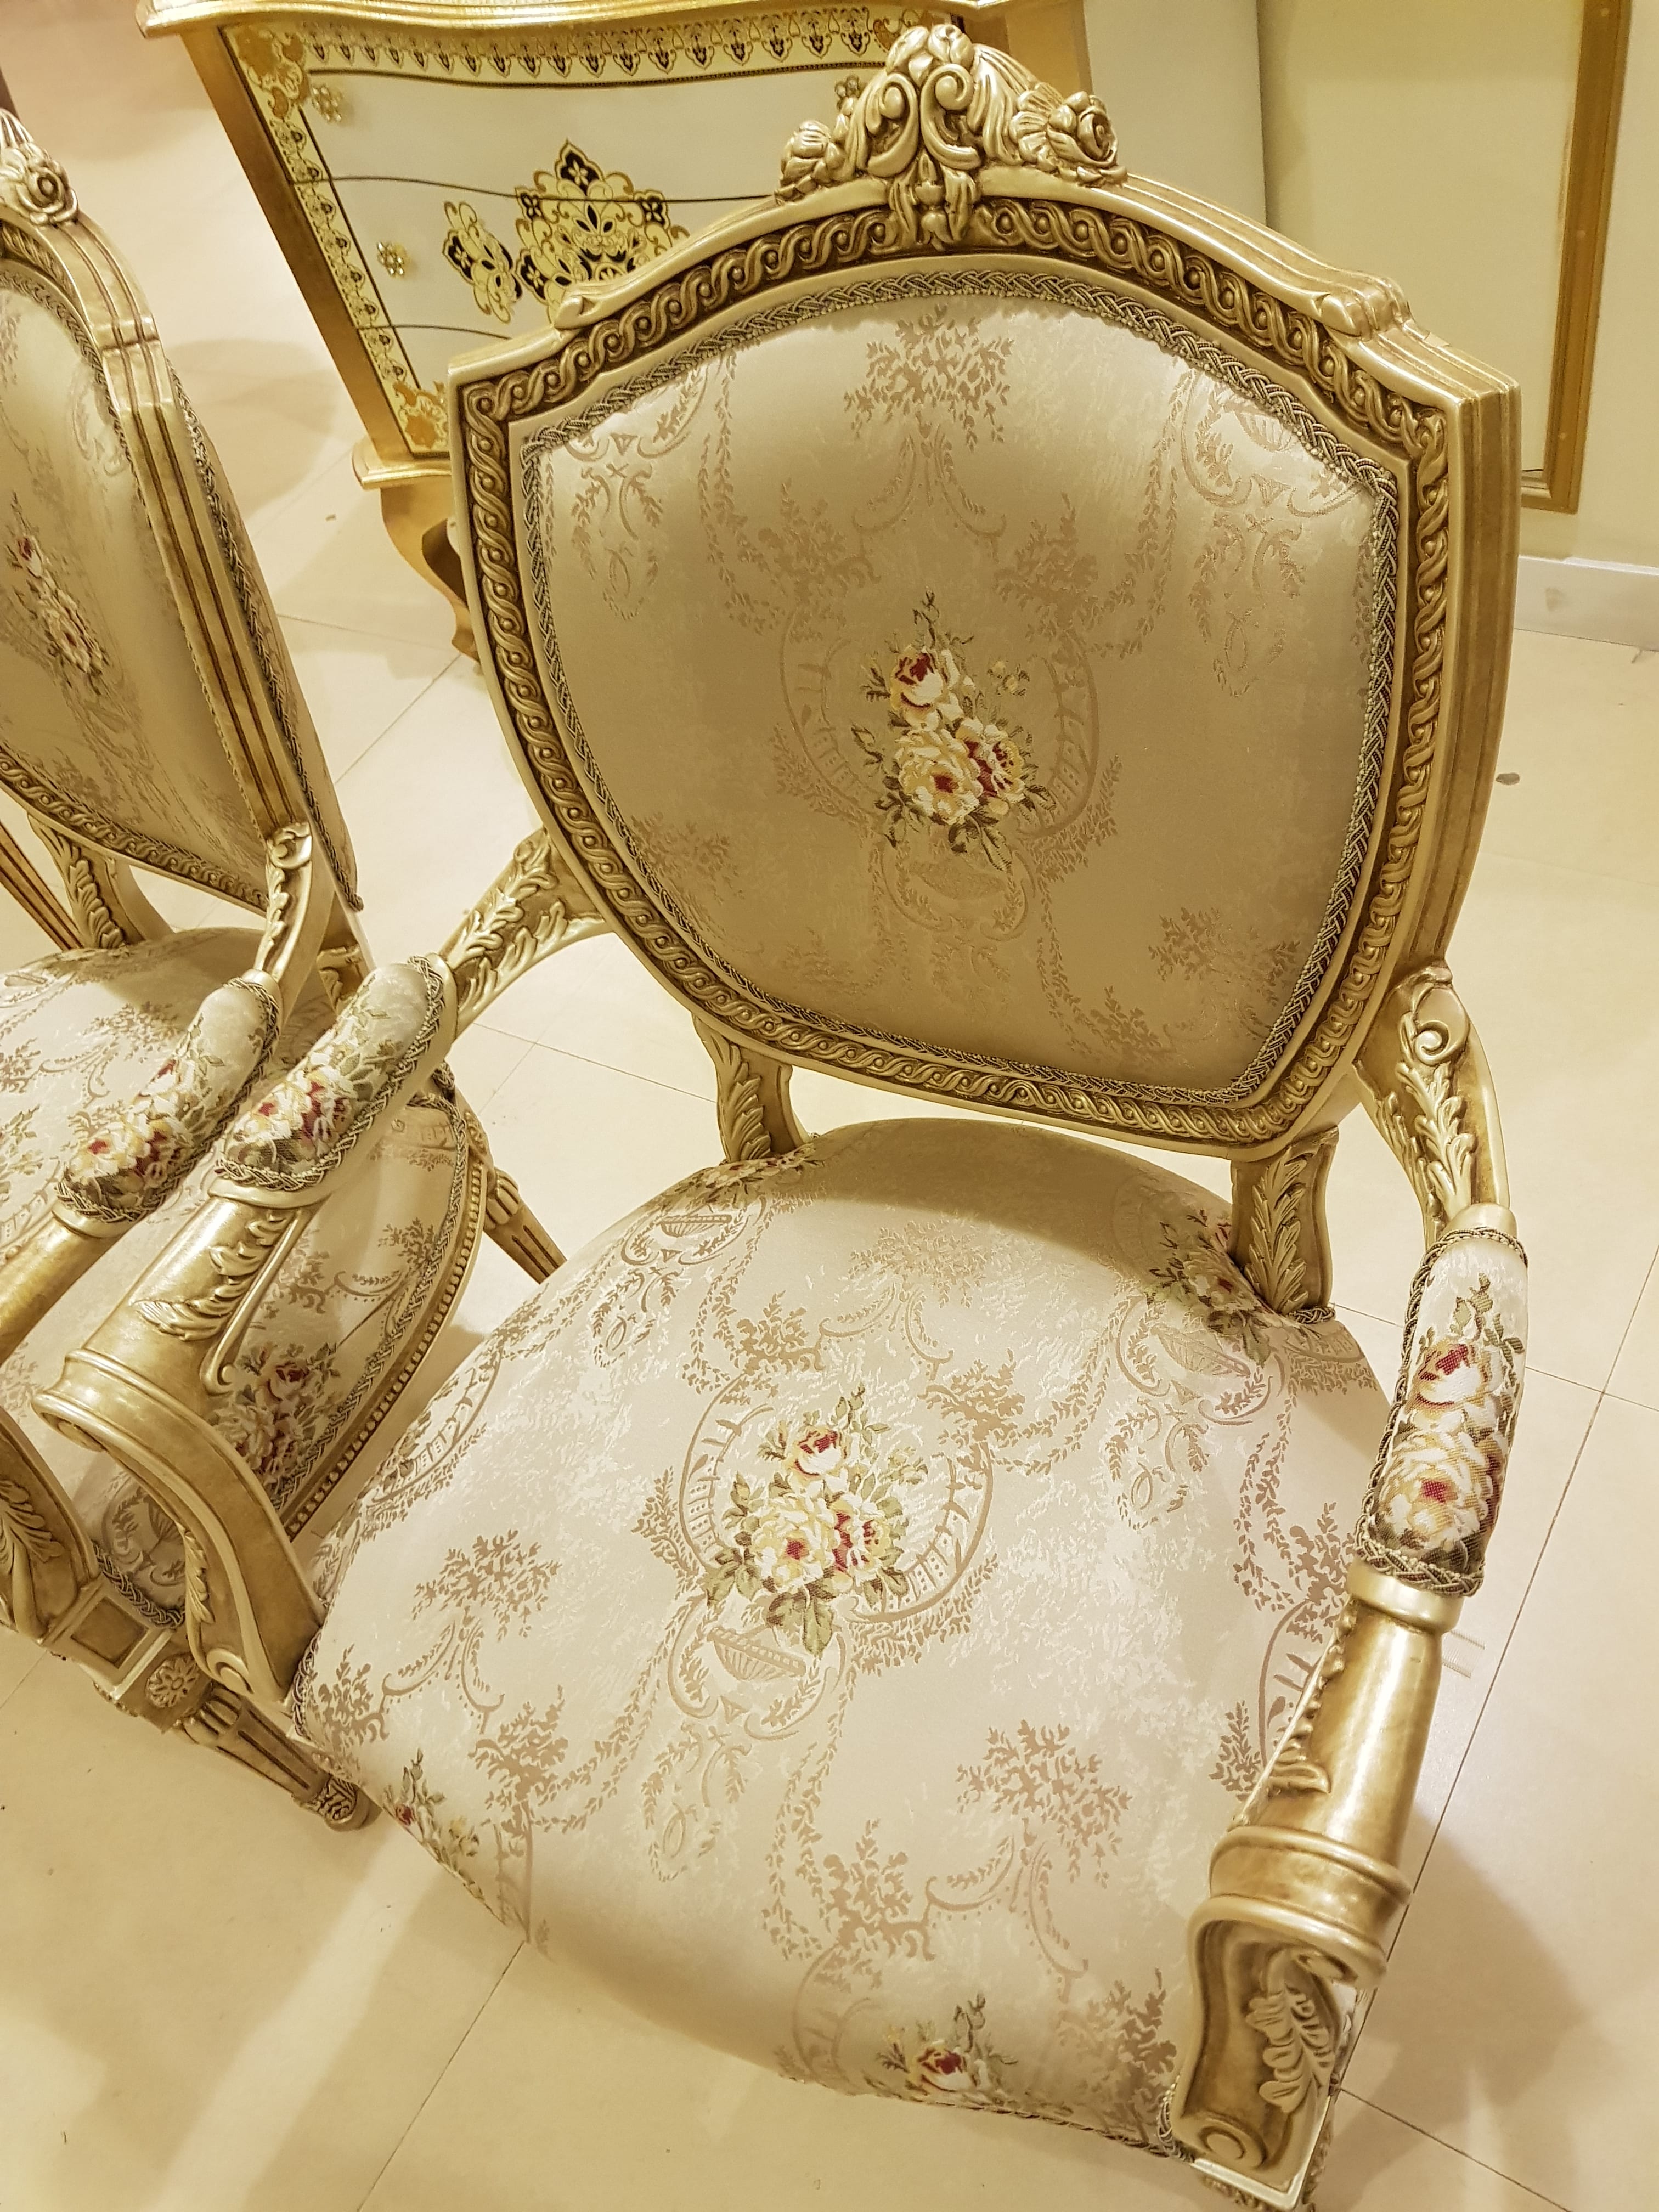 1 Best Chair Upholstery Dubai Repair, What Is The Best Fabric To Reupholster Dining Chairs In Dubai